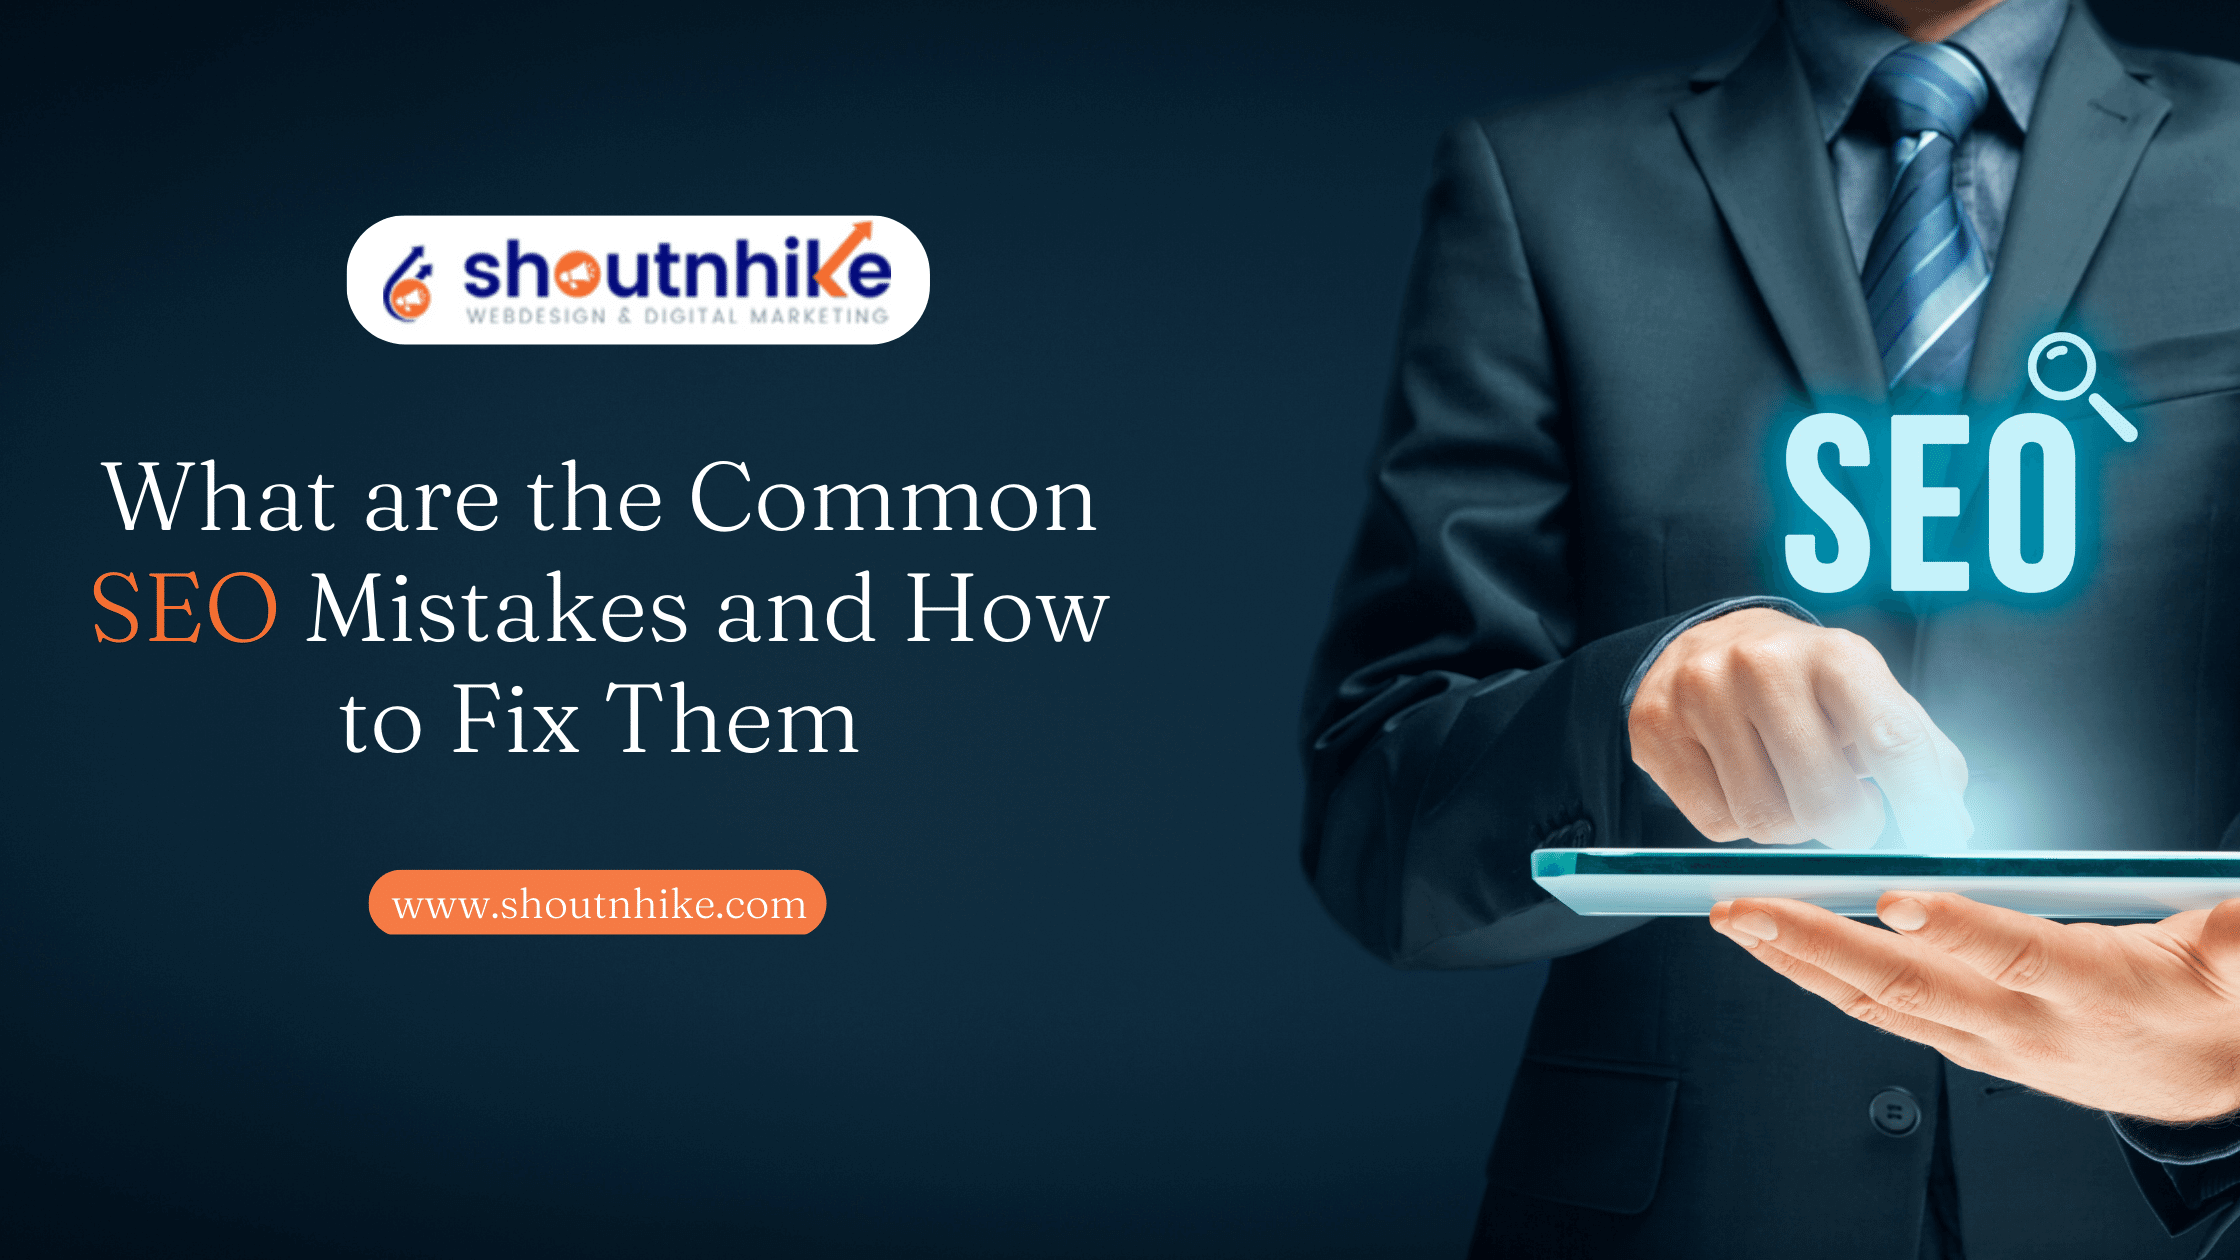 What are the Common SEO Mistakes and How to Fix Them